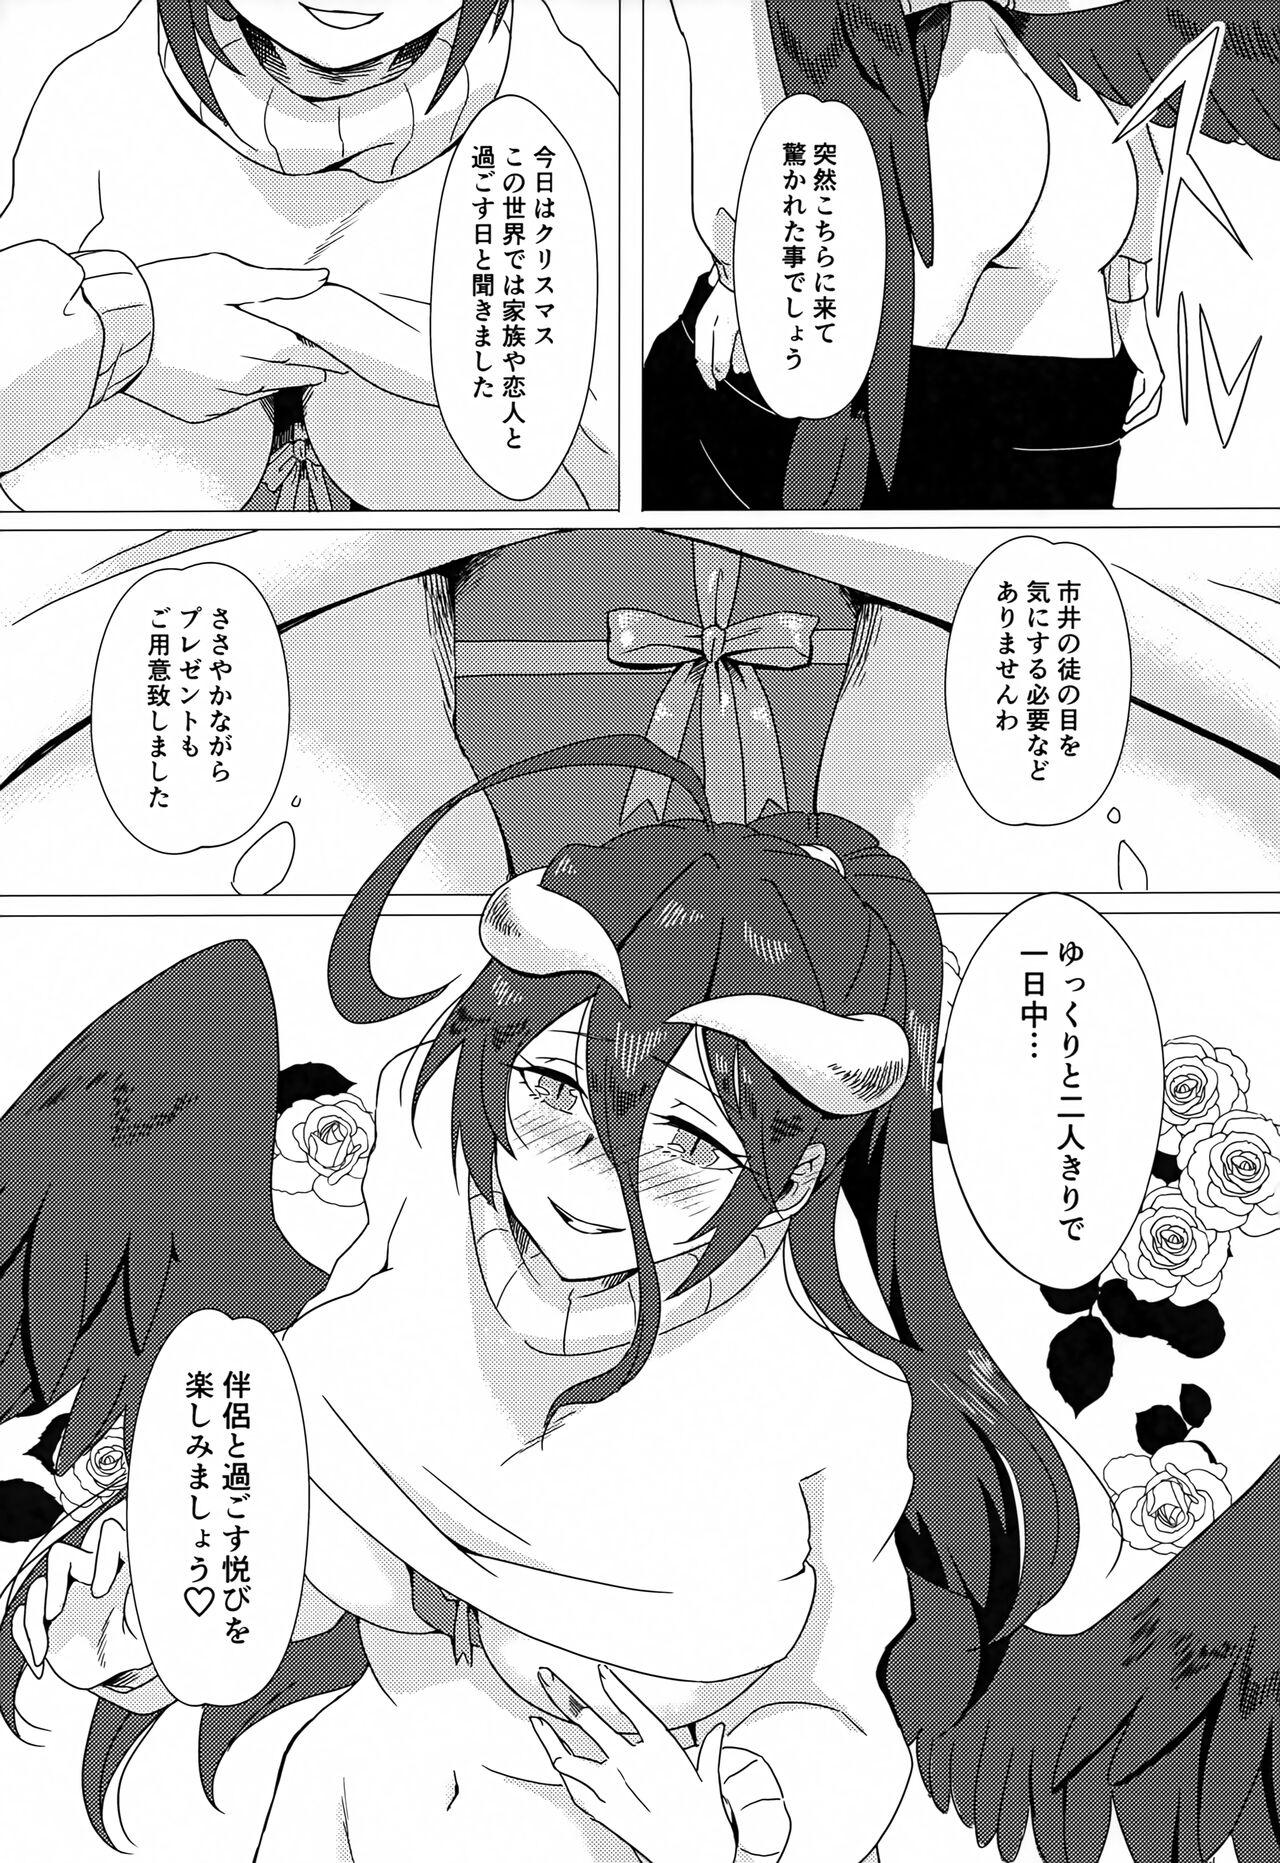 Teen Porn Albedo-san to! 2 - Overlord Story - Page 8